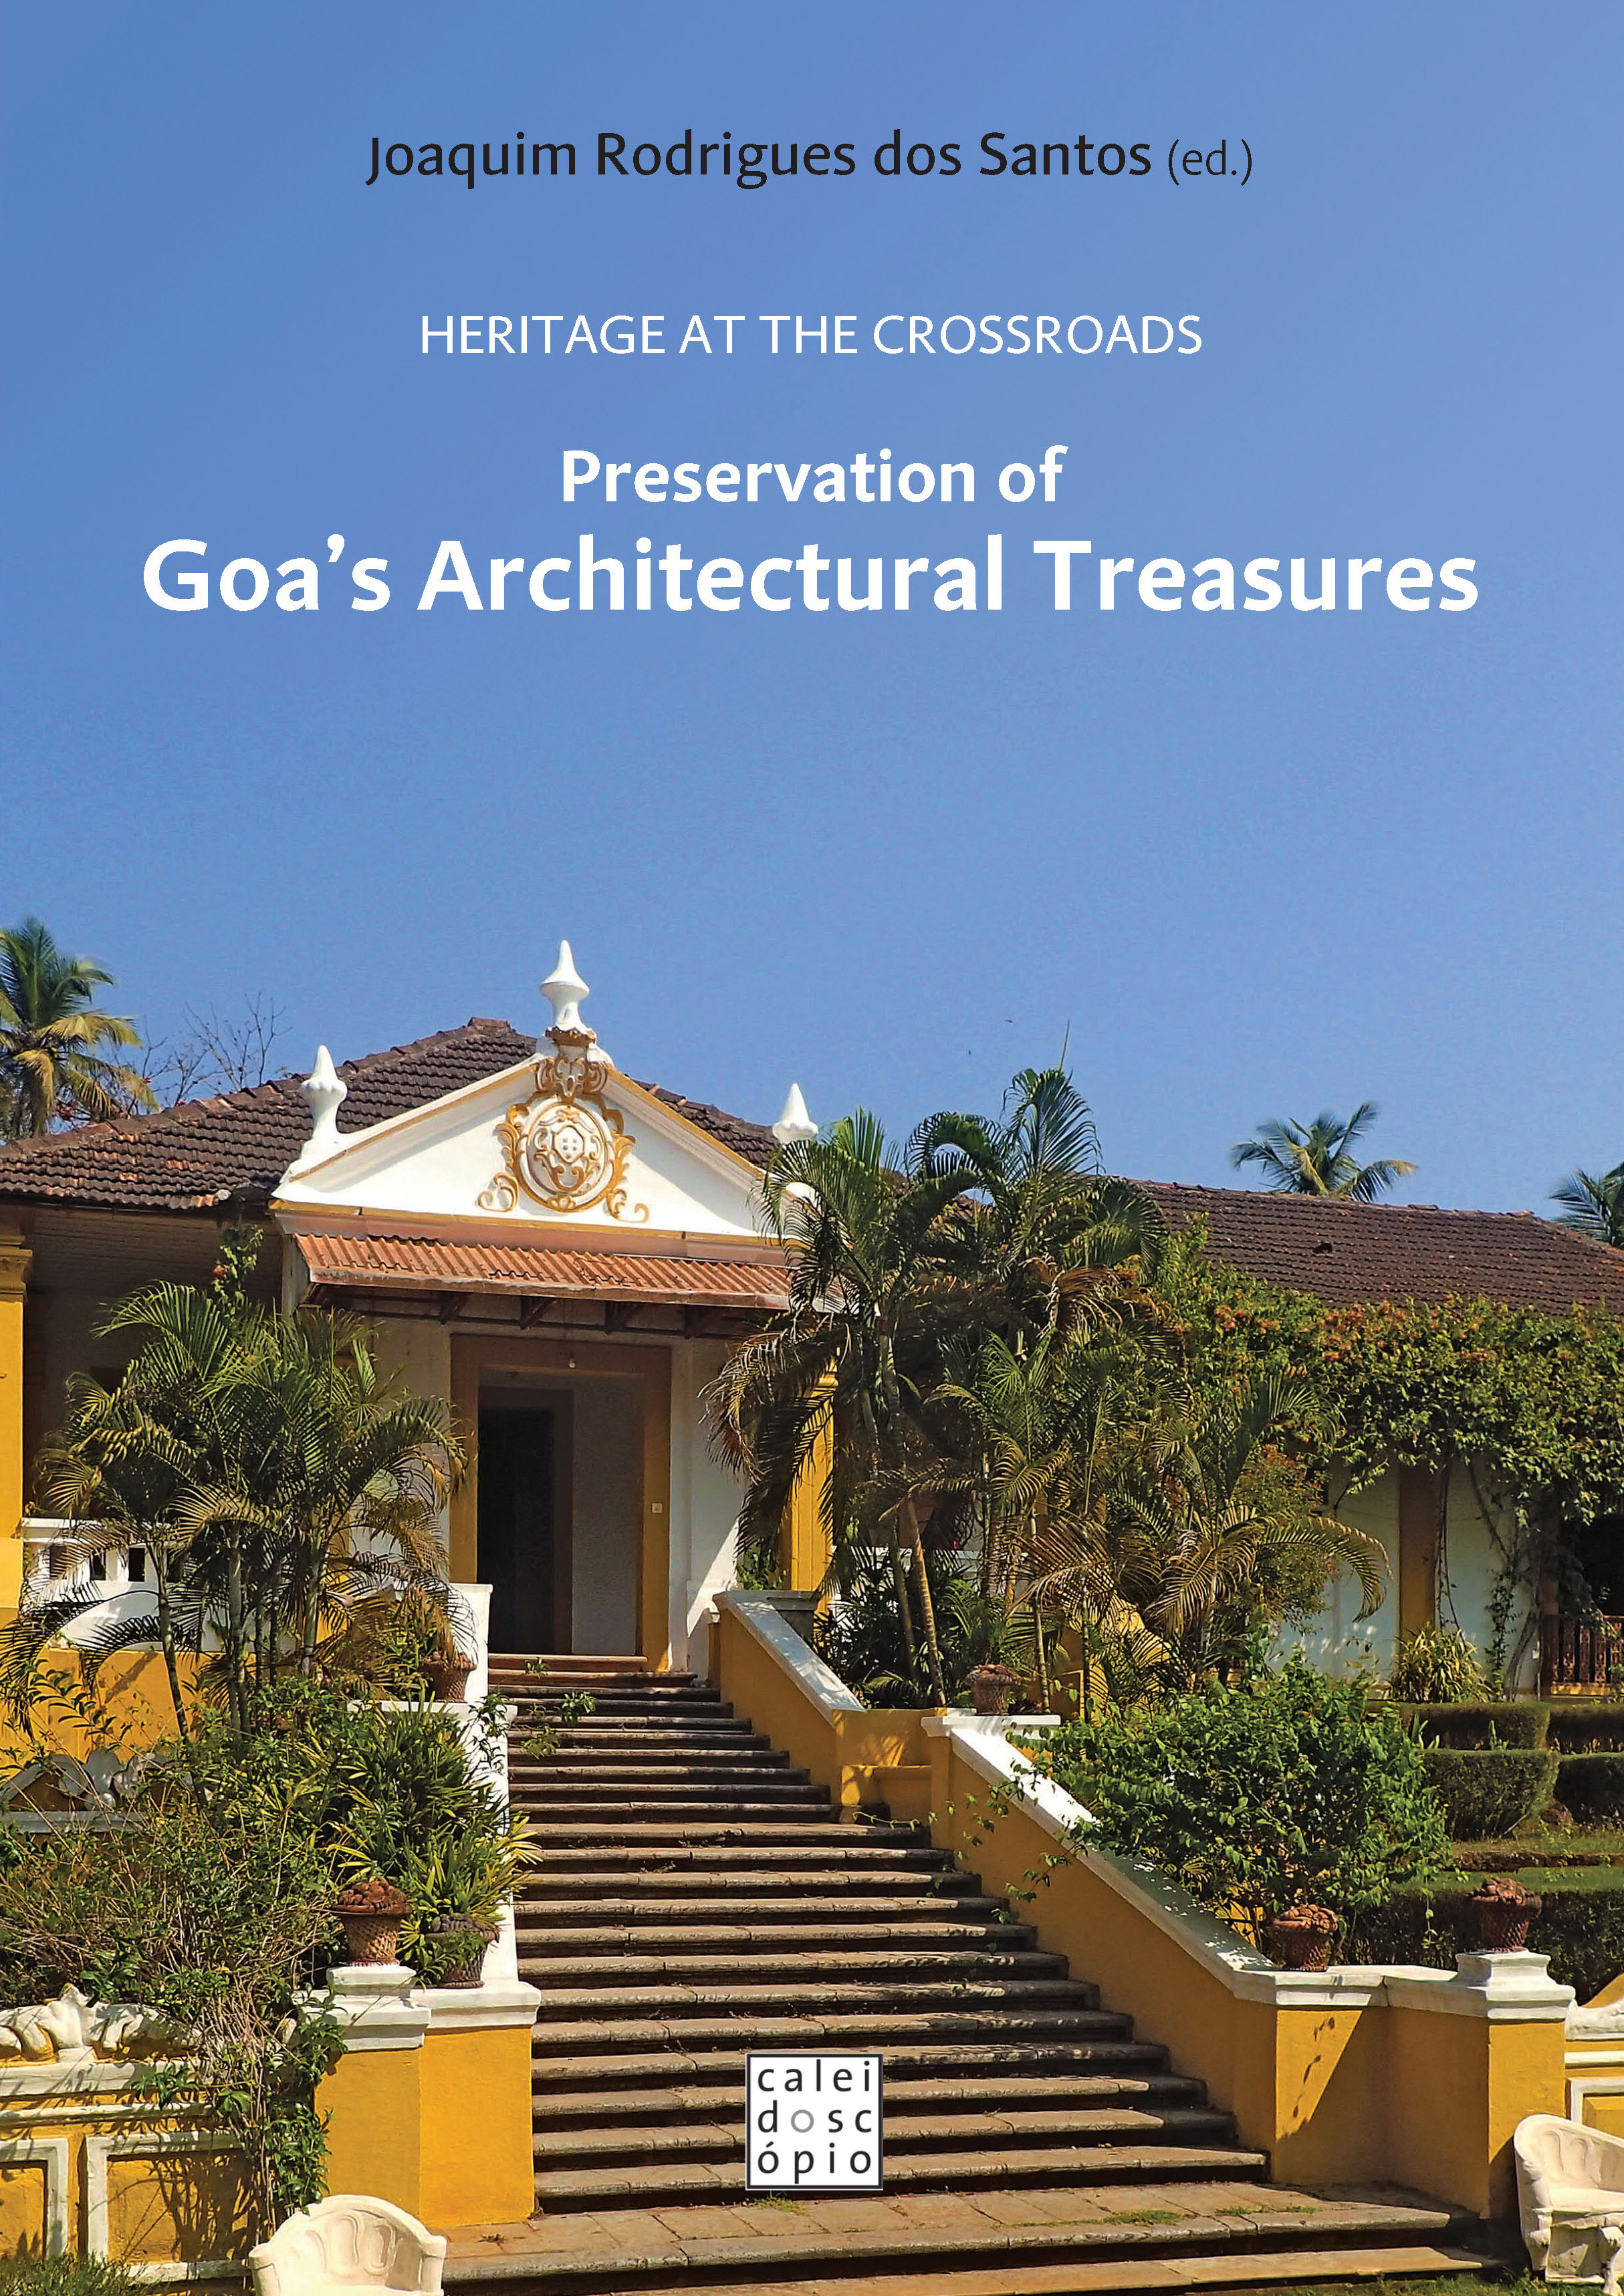 BOOK LAUNCH: "HERITAGE AT THE CROSSROADS: PRESERVATION OF GOA?S ARCHITECTURAL TREASURES"